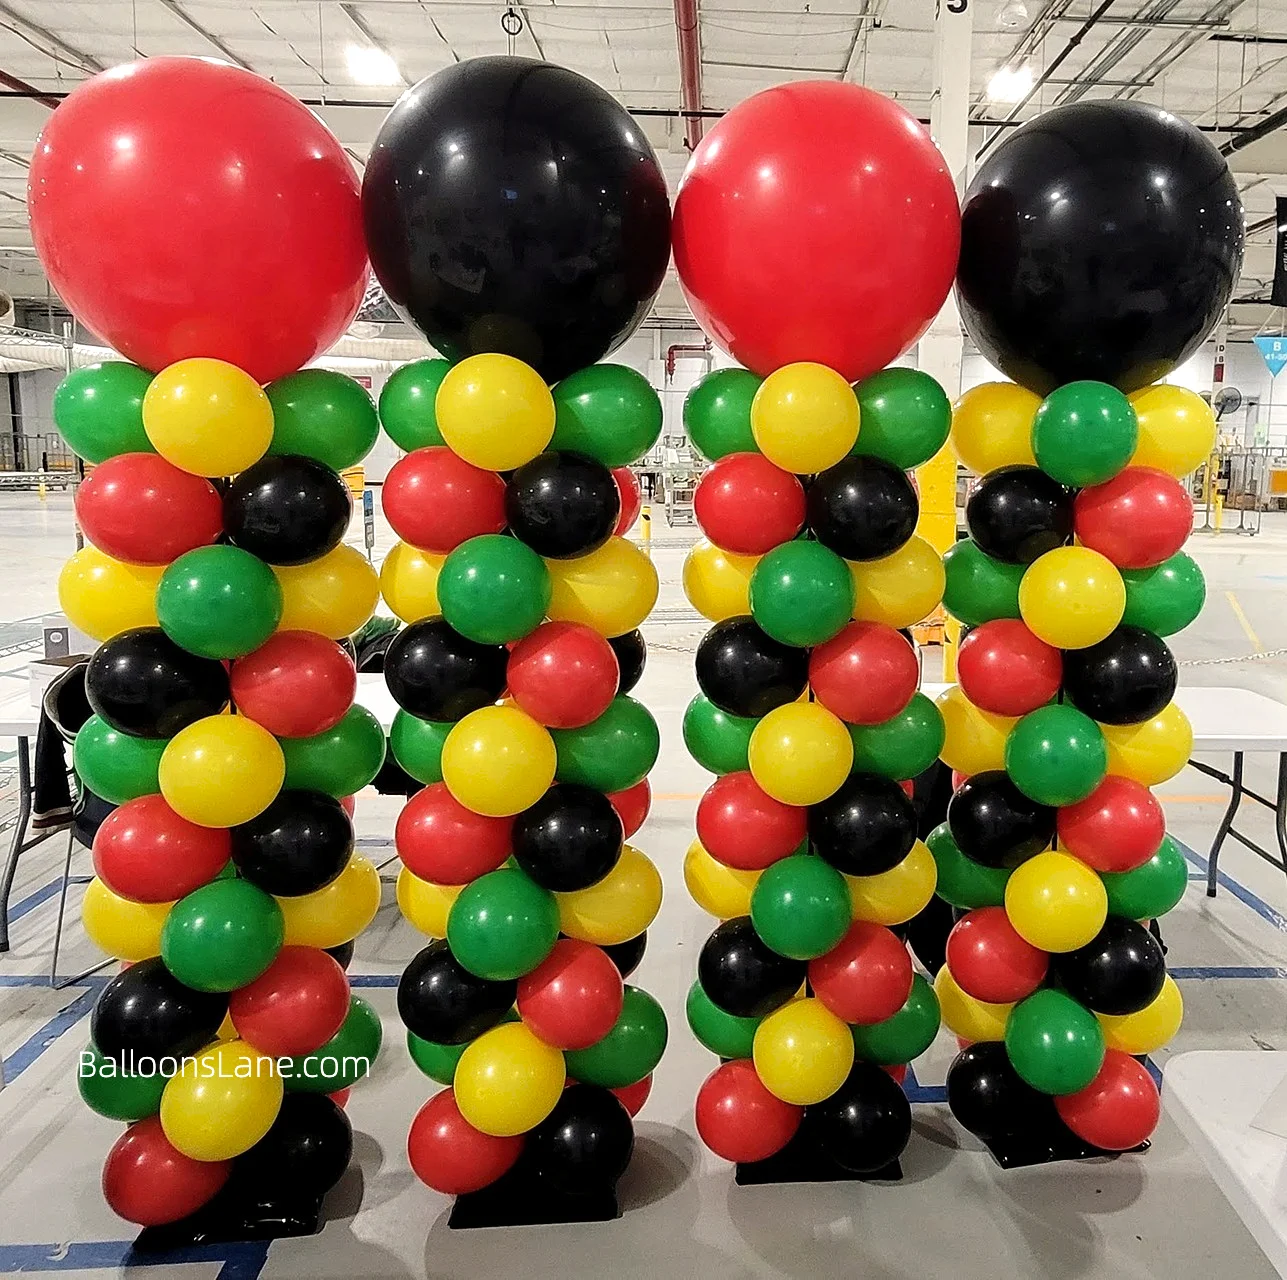 Red, green, black, and yellow balloon columns with large sized balloons in the same colors on top to celebrate birthdays and school events in Staten Island.